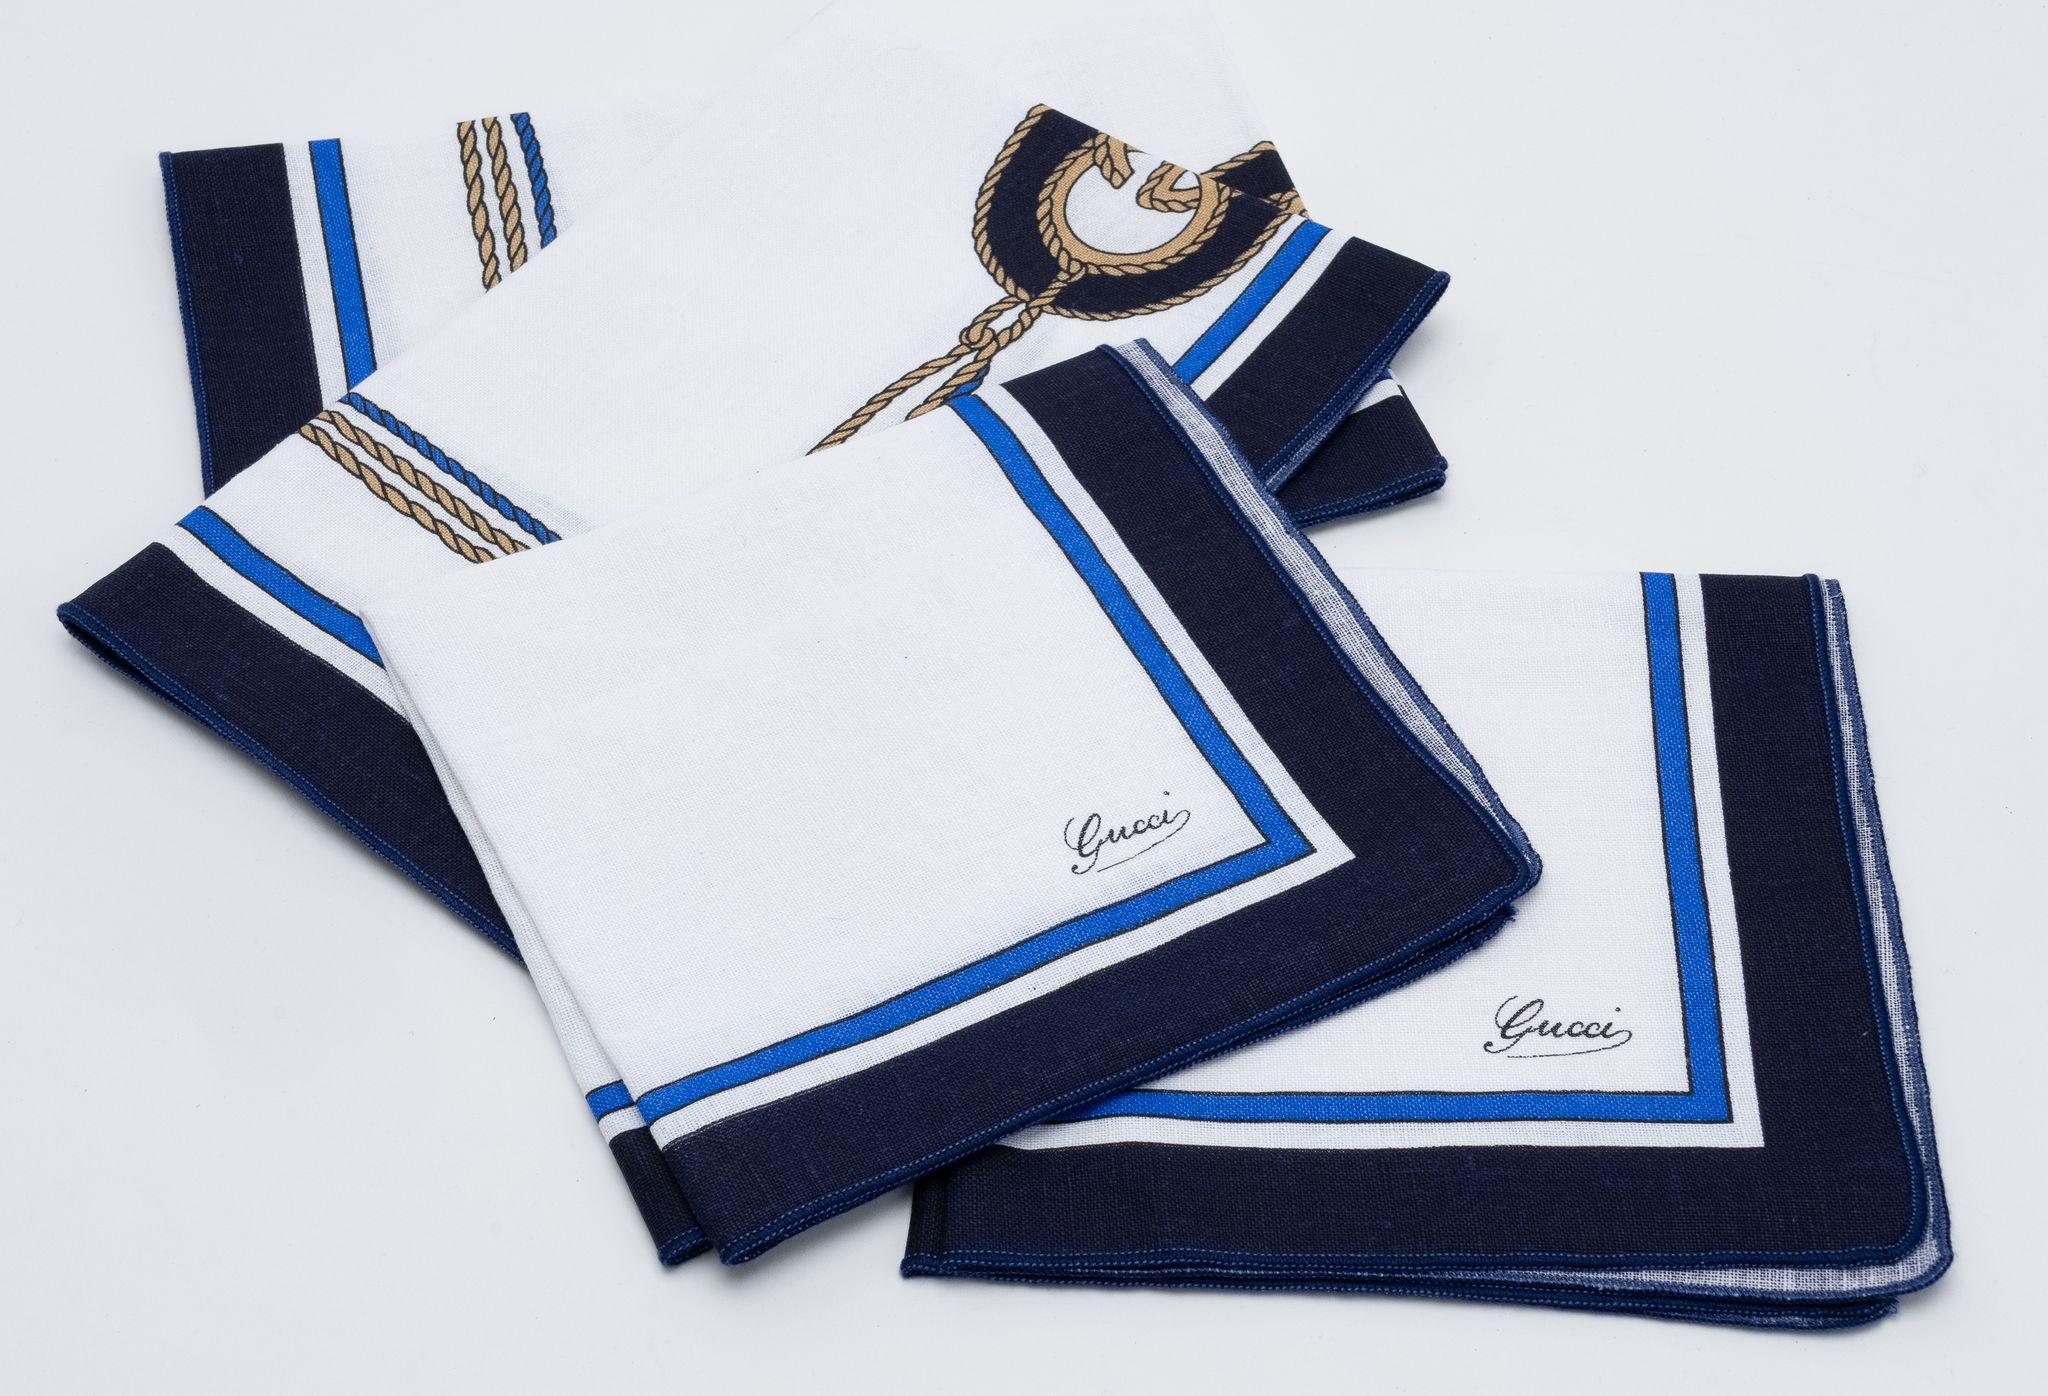 Gucci Set of two Nautical Breakfast Table set white and blue. 2 placemats and 2 napkins.
50% Cotton and 50% Linen. Mint condition. 
Made in Italy.
Placemat 20